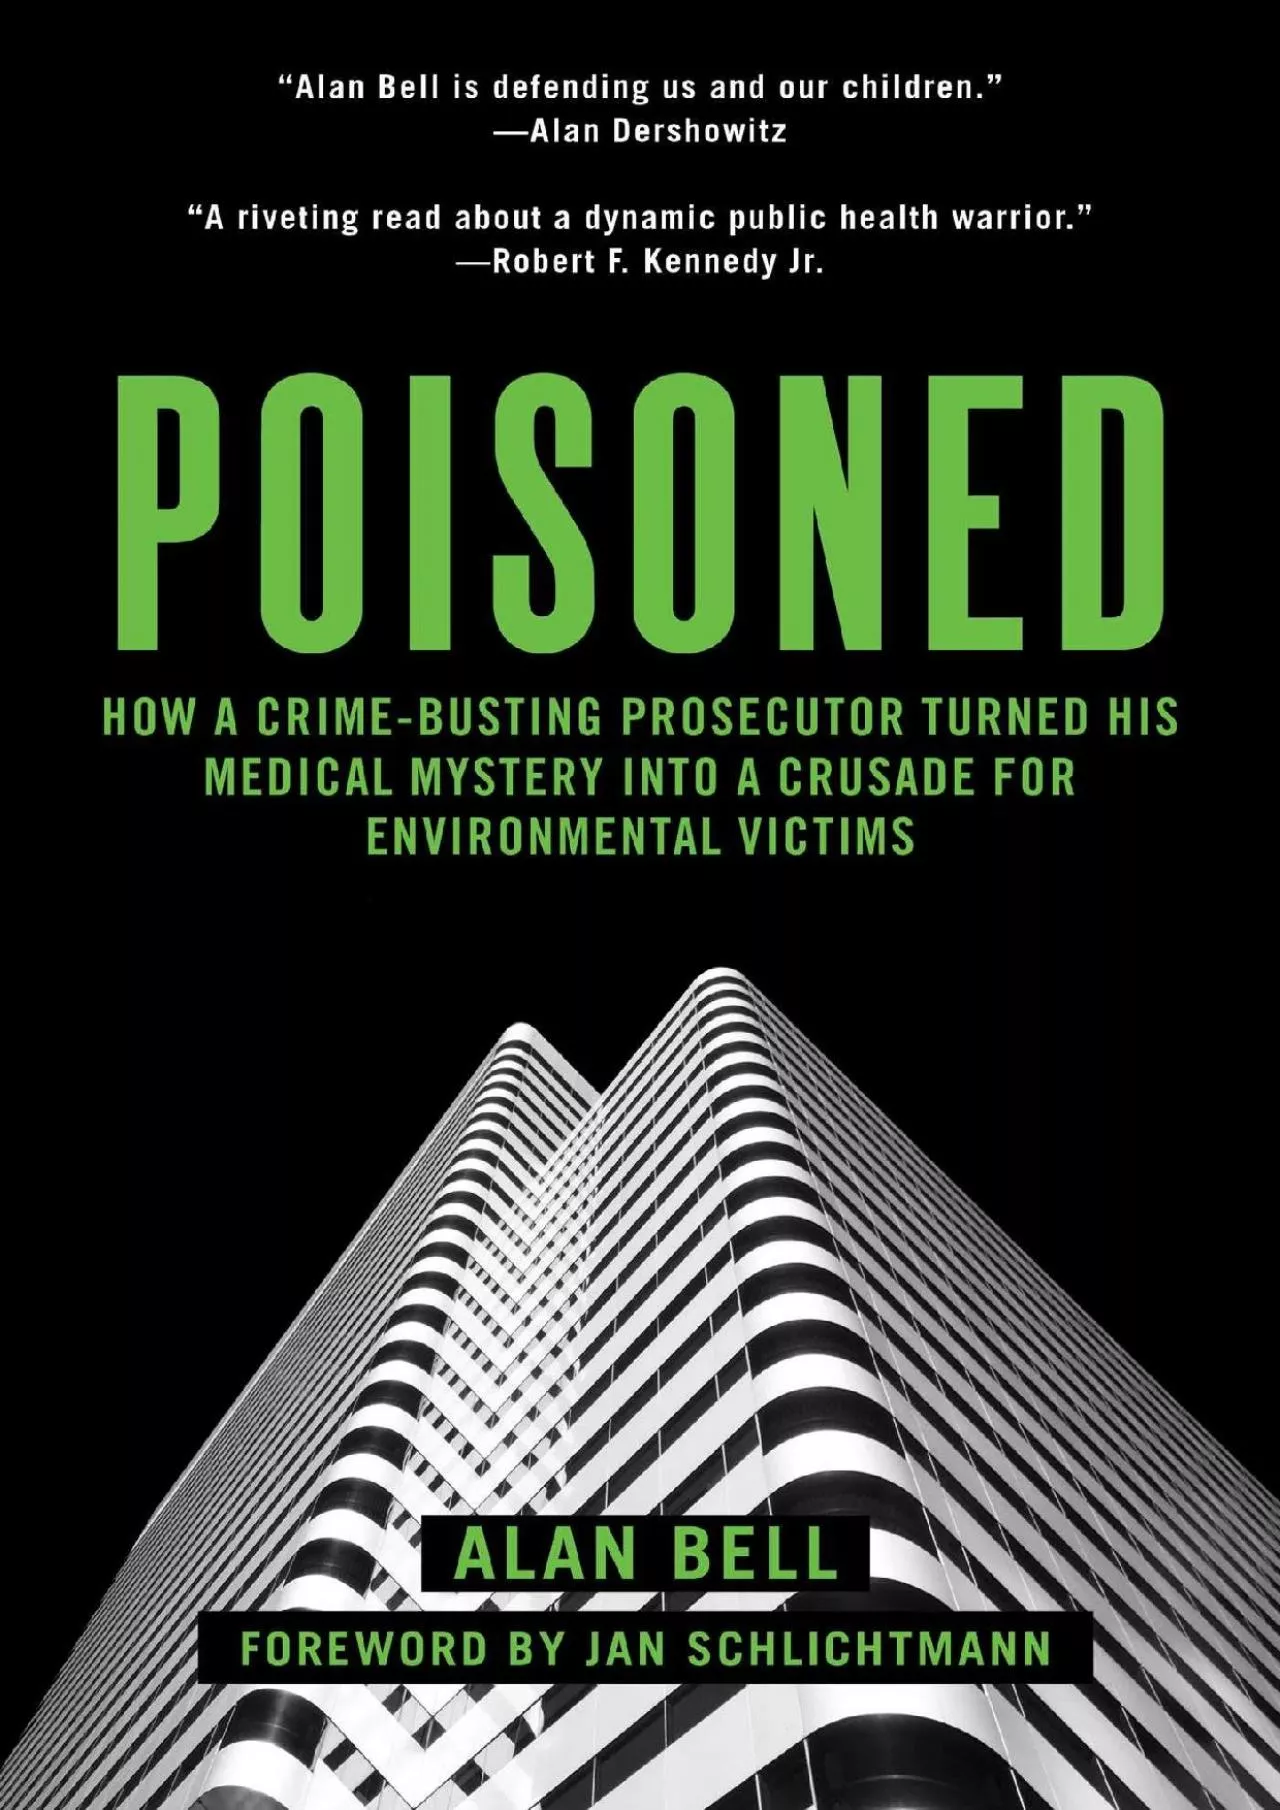 [BOOK]-Poisoned: How a Crime-Busting Prosecutor Turned His Medical Mystery into a Crusade